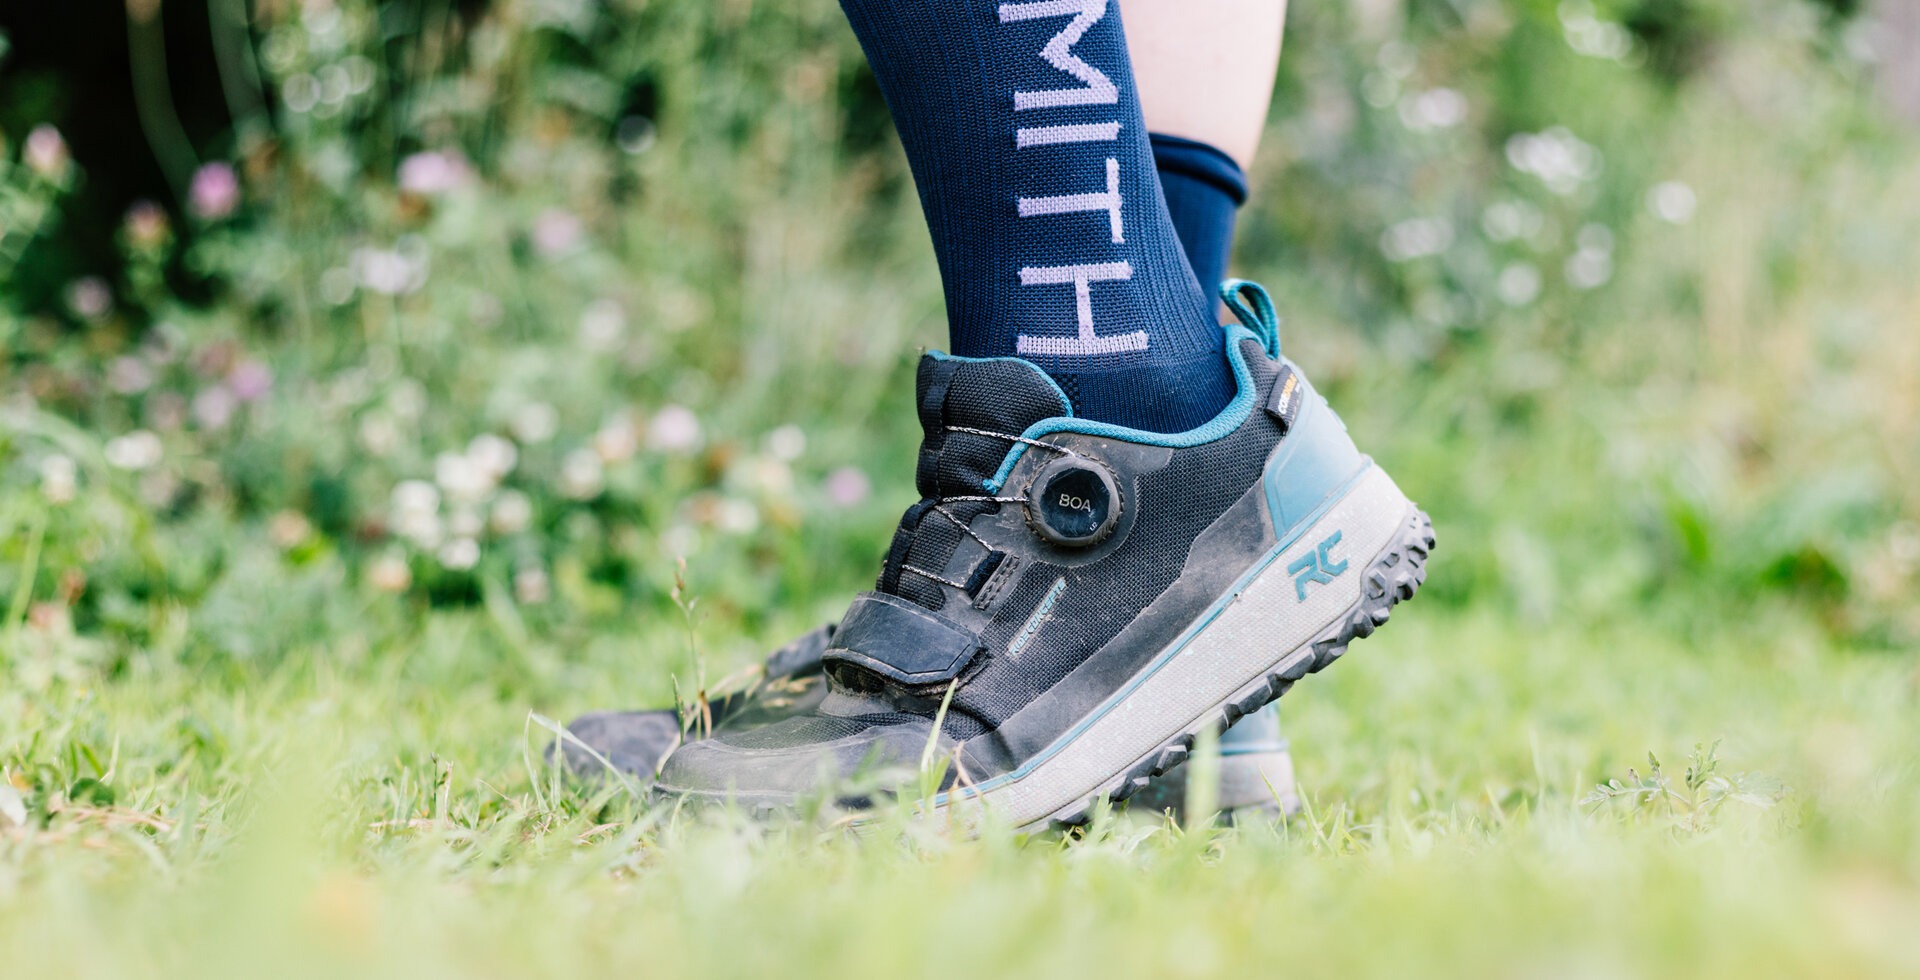 Flume BOA® combines advanced off-road footwear technology with bike-specific performance to offer a trail flat shoe that’s designed to outlast the biggest epics.